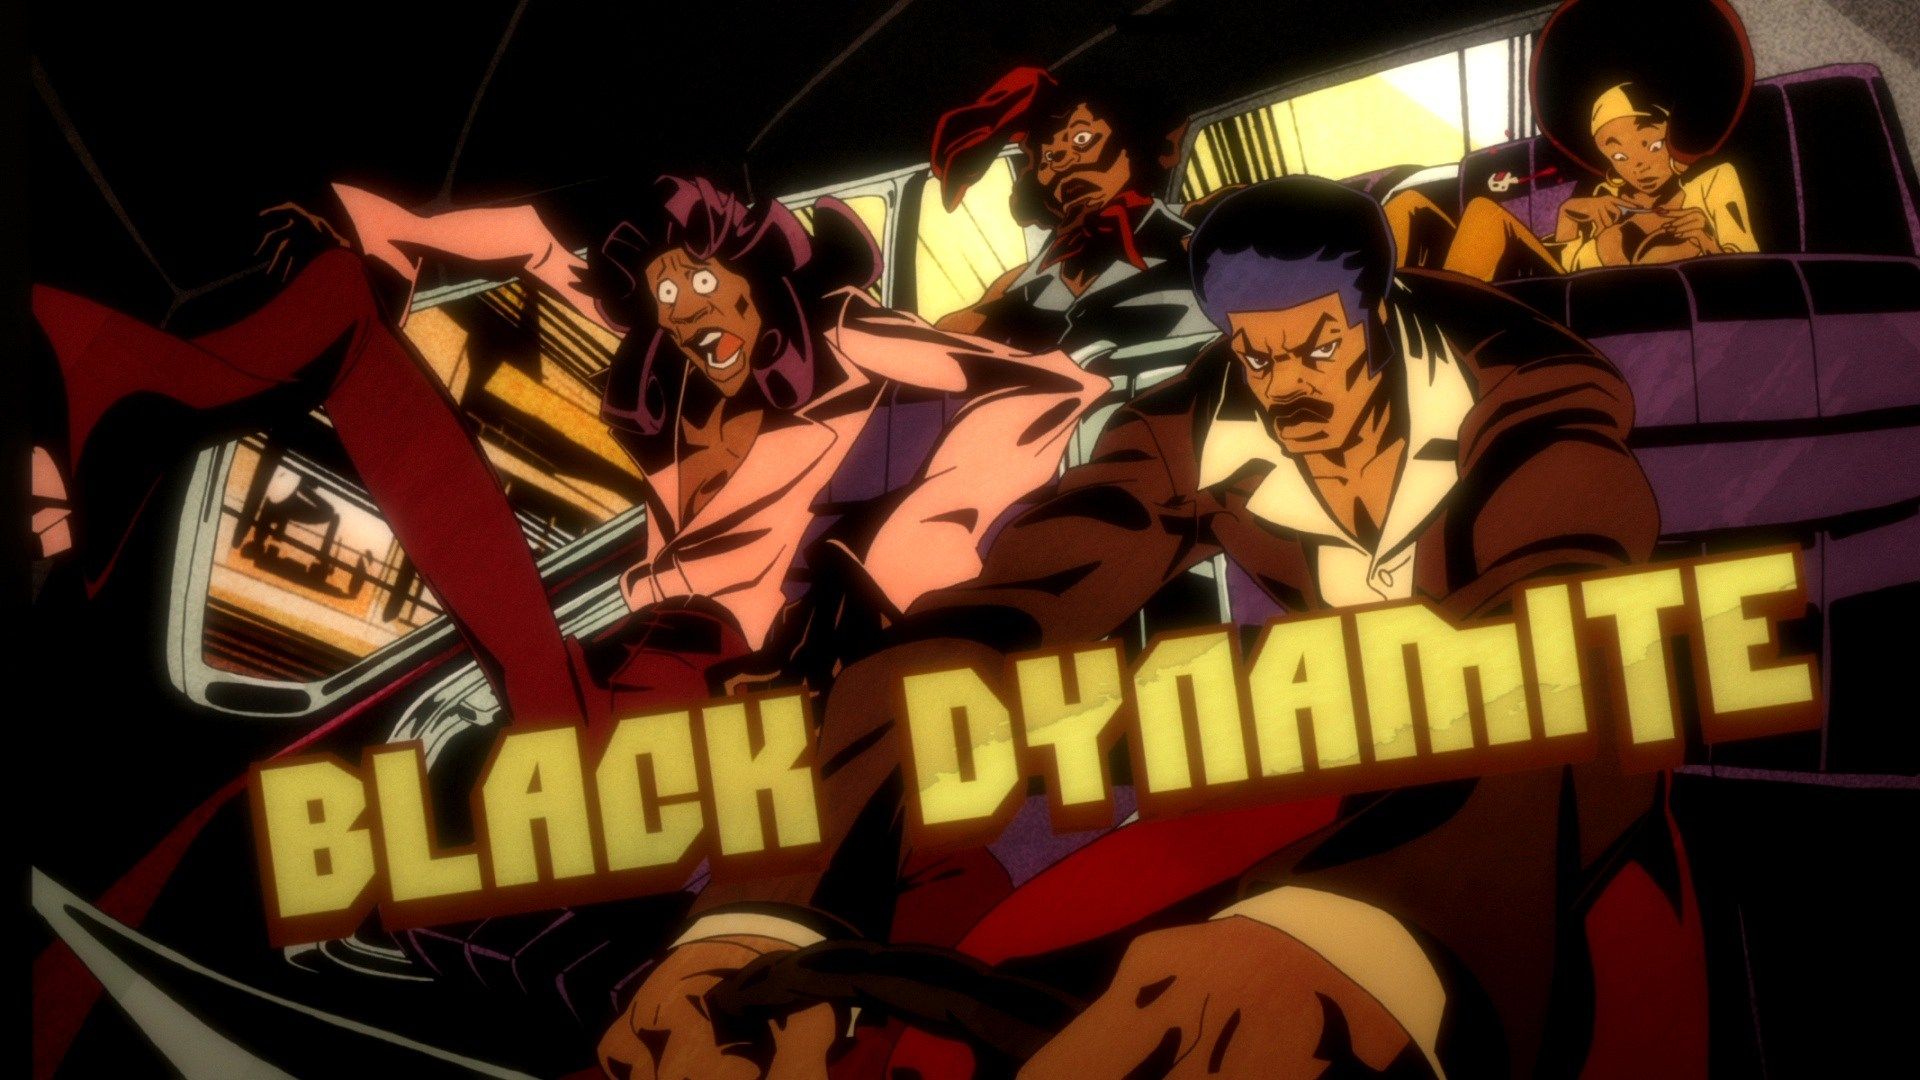 Review: Black Dynamite Roots: The White Album or the Blacker the Community the Deeper the Roots!